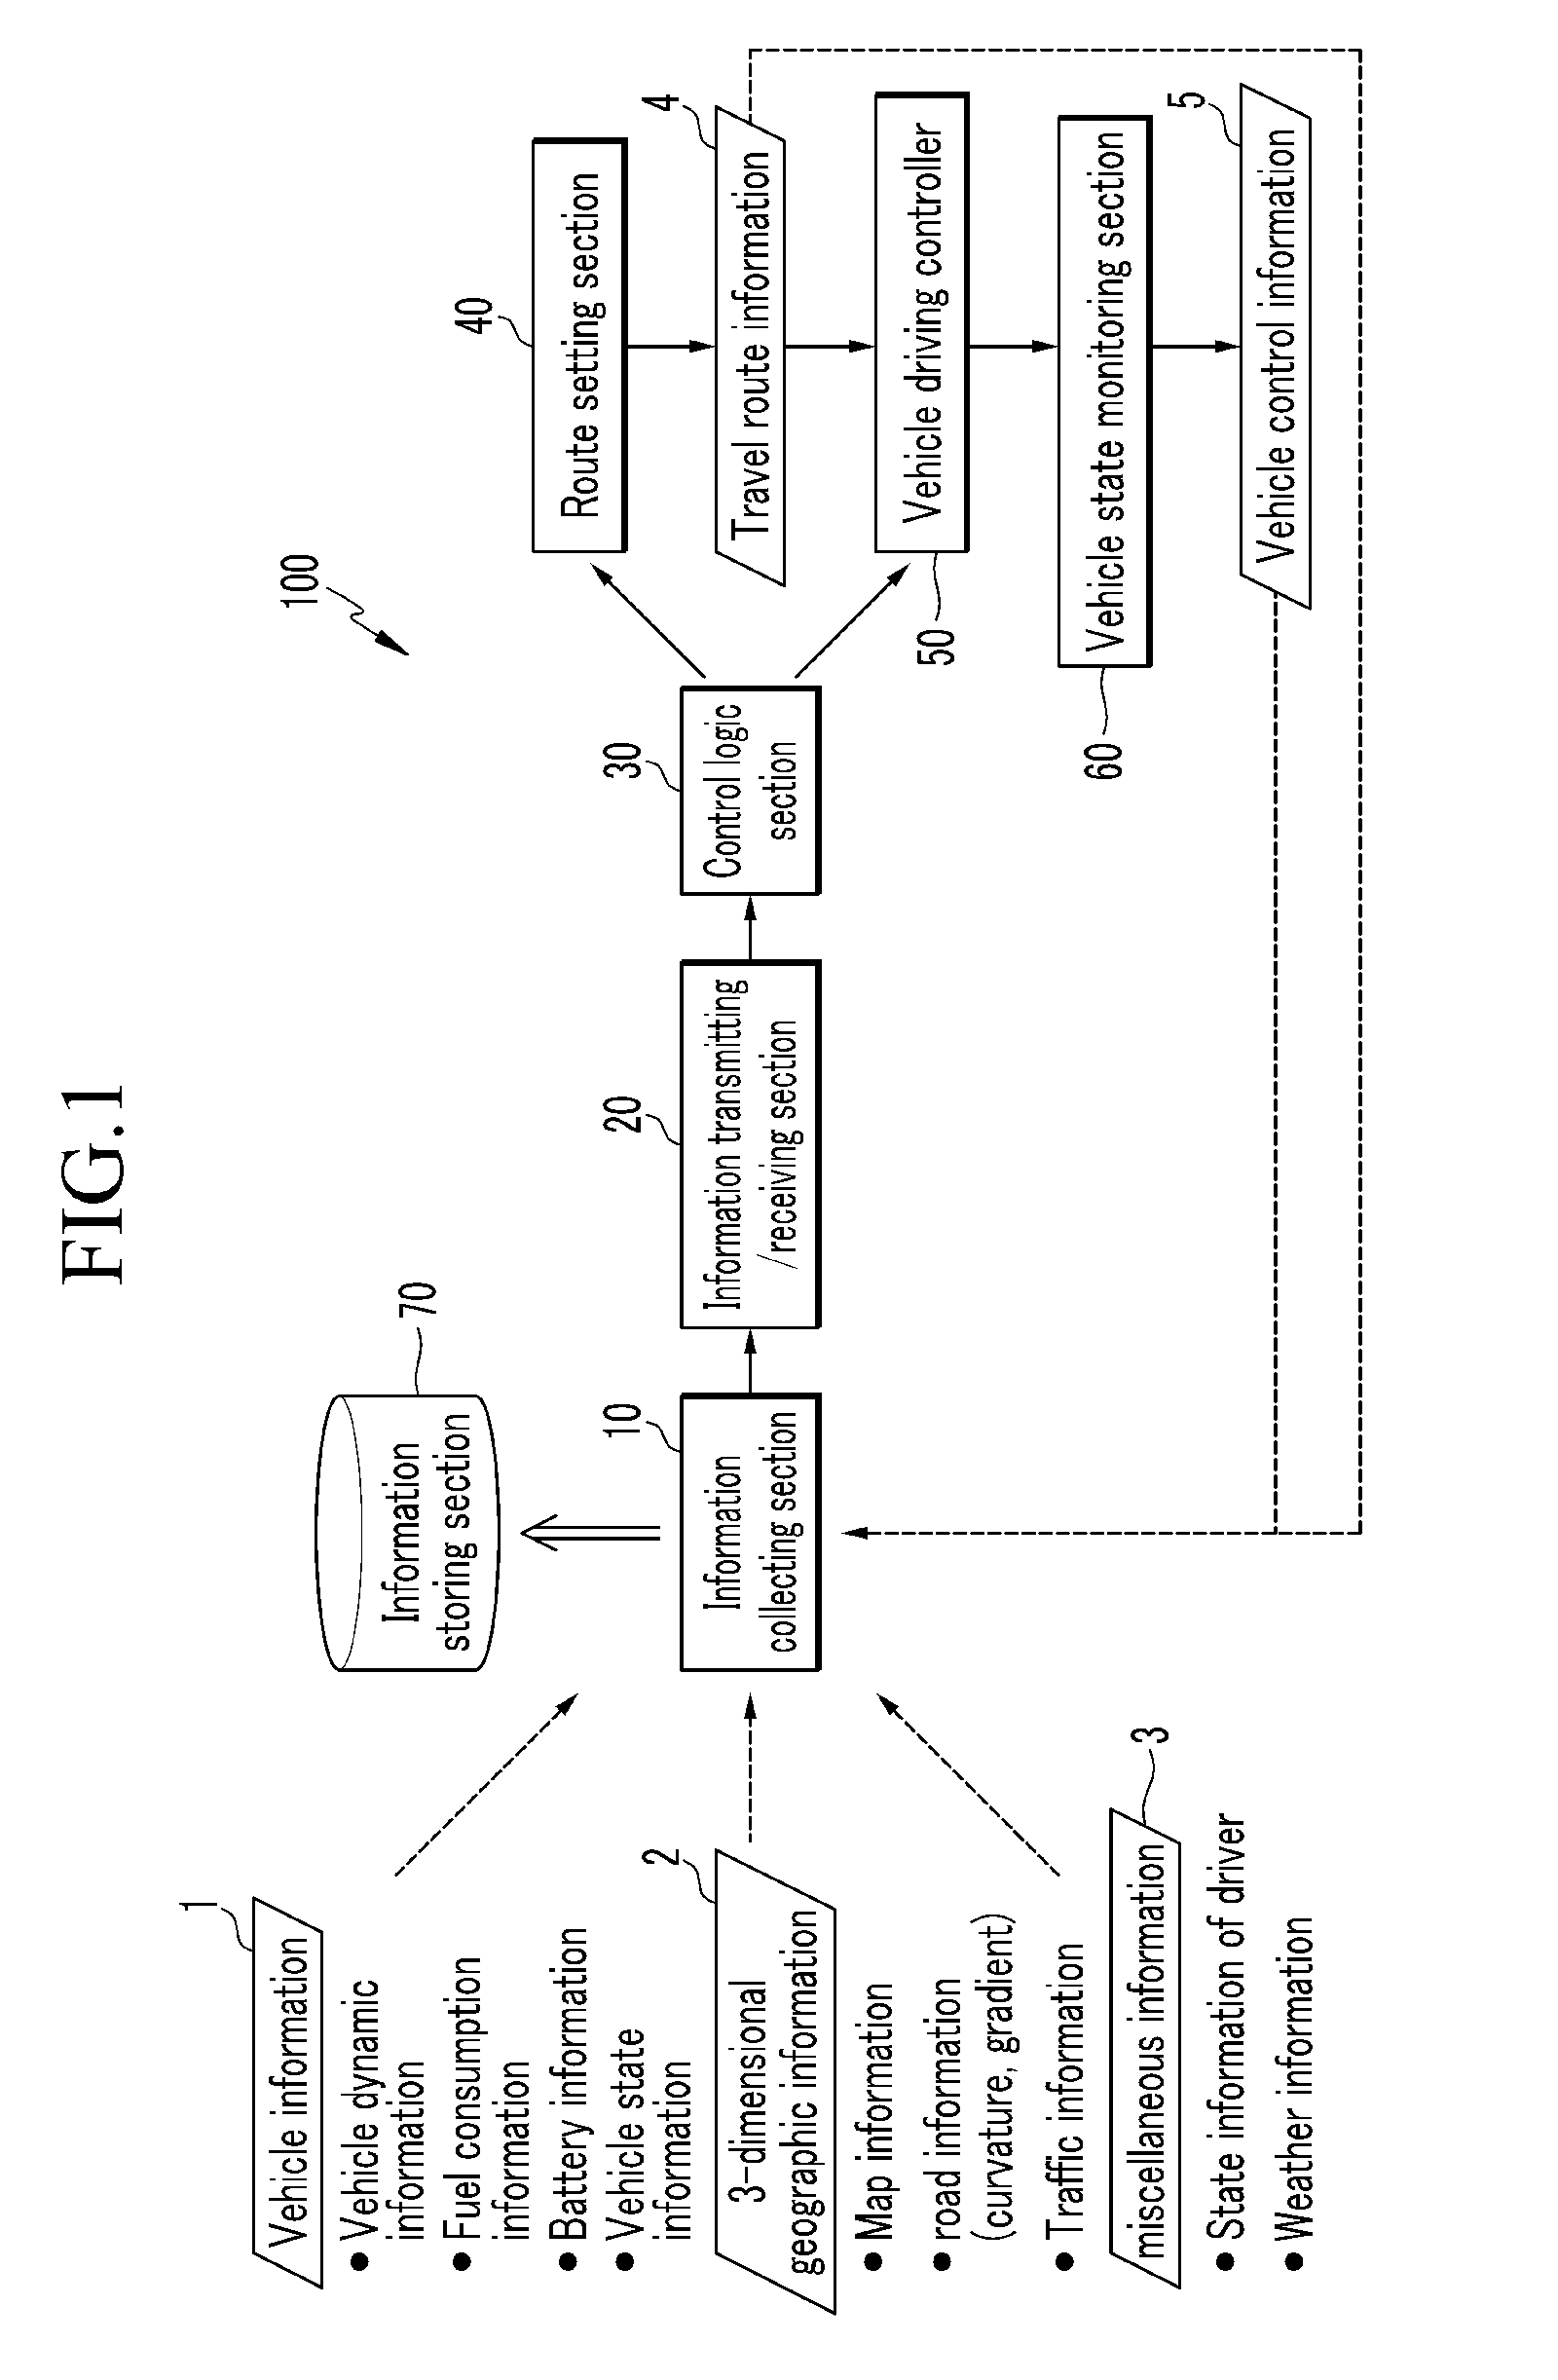 System and method of assisting driver in driving electric vehicle in more environmentally efficient manner